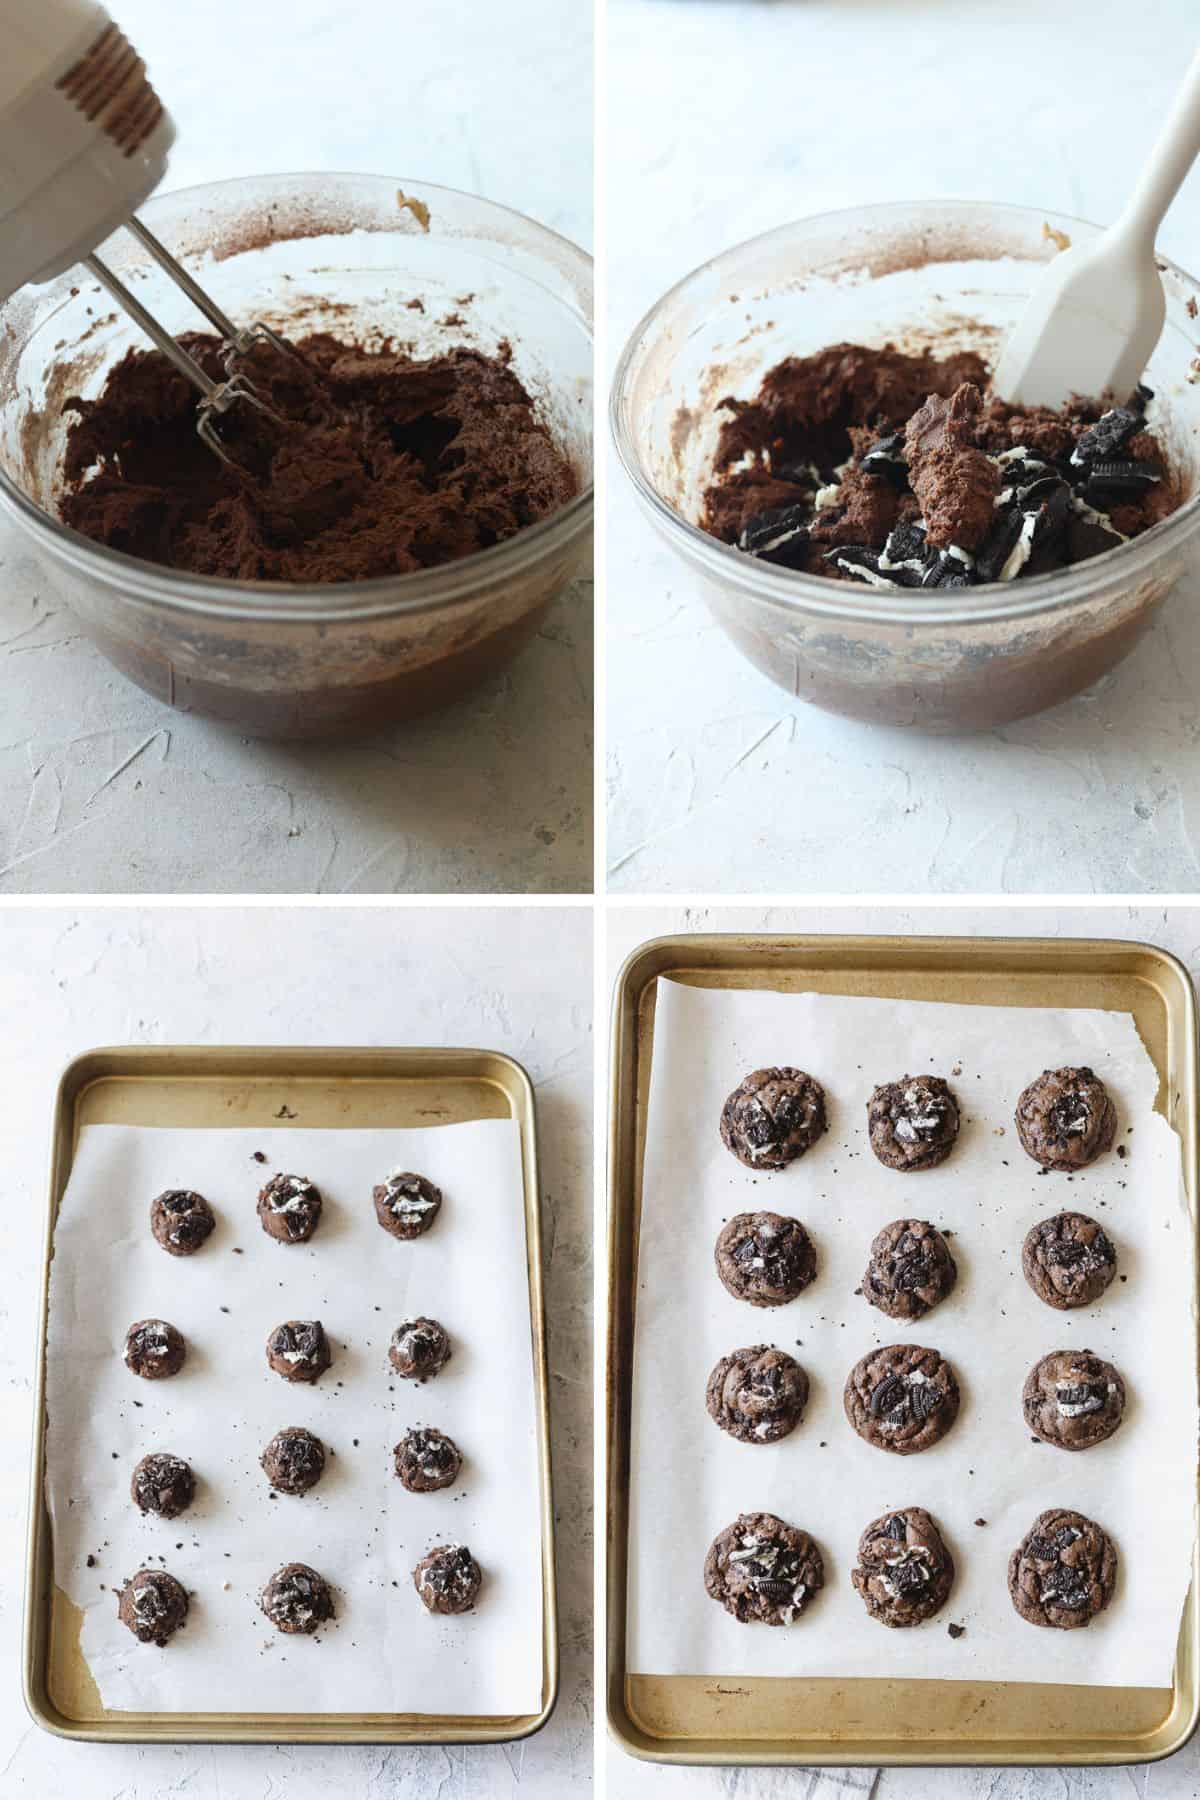 Step by step of chocolate cookies - mixing the dough, scooping the cookies, pressing cookie pieces into the tops, and the baked cookies.